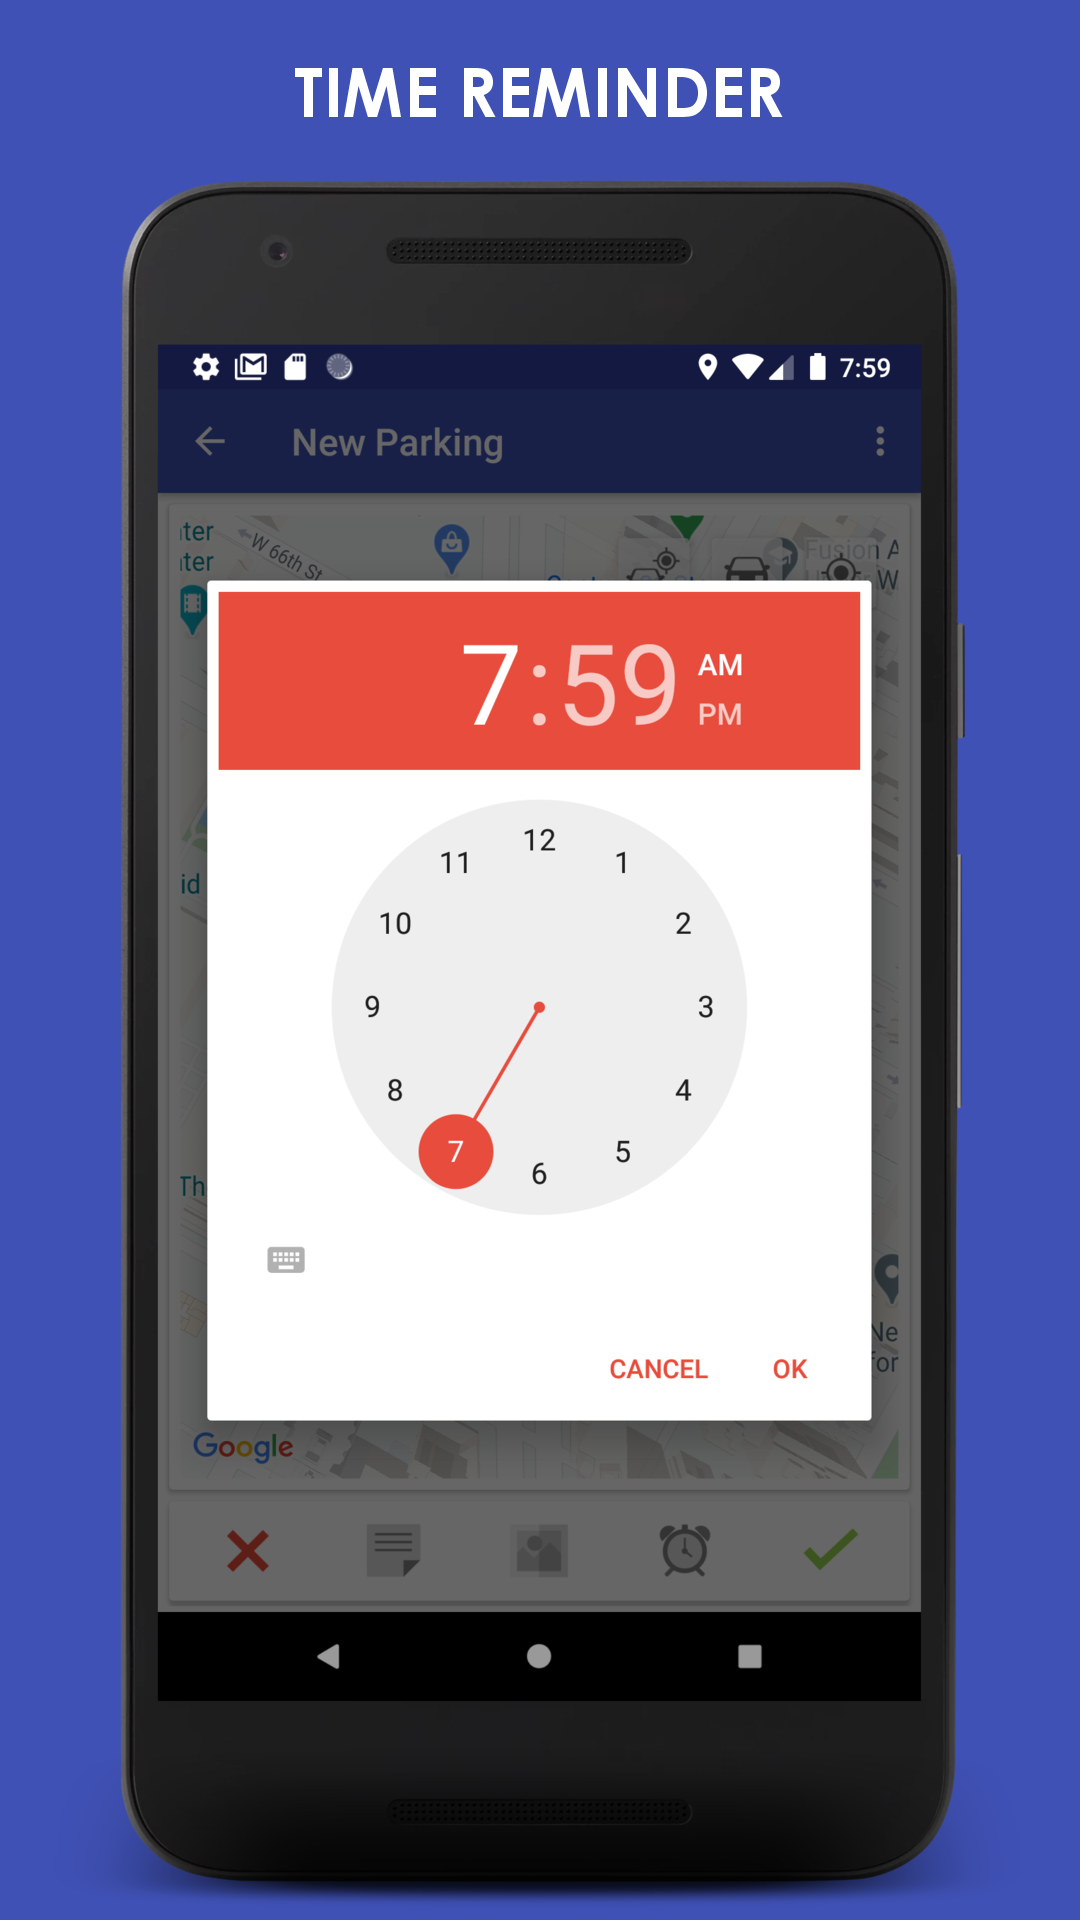 Android application ParKing: Where is my car? Find my car - Automatic screenshort